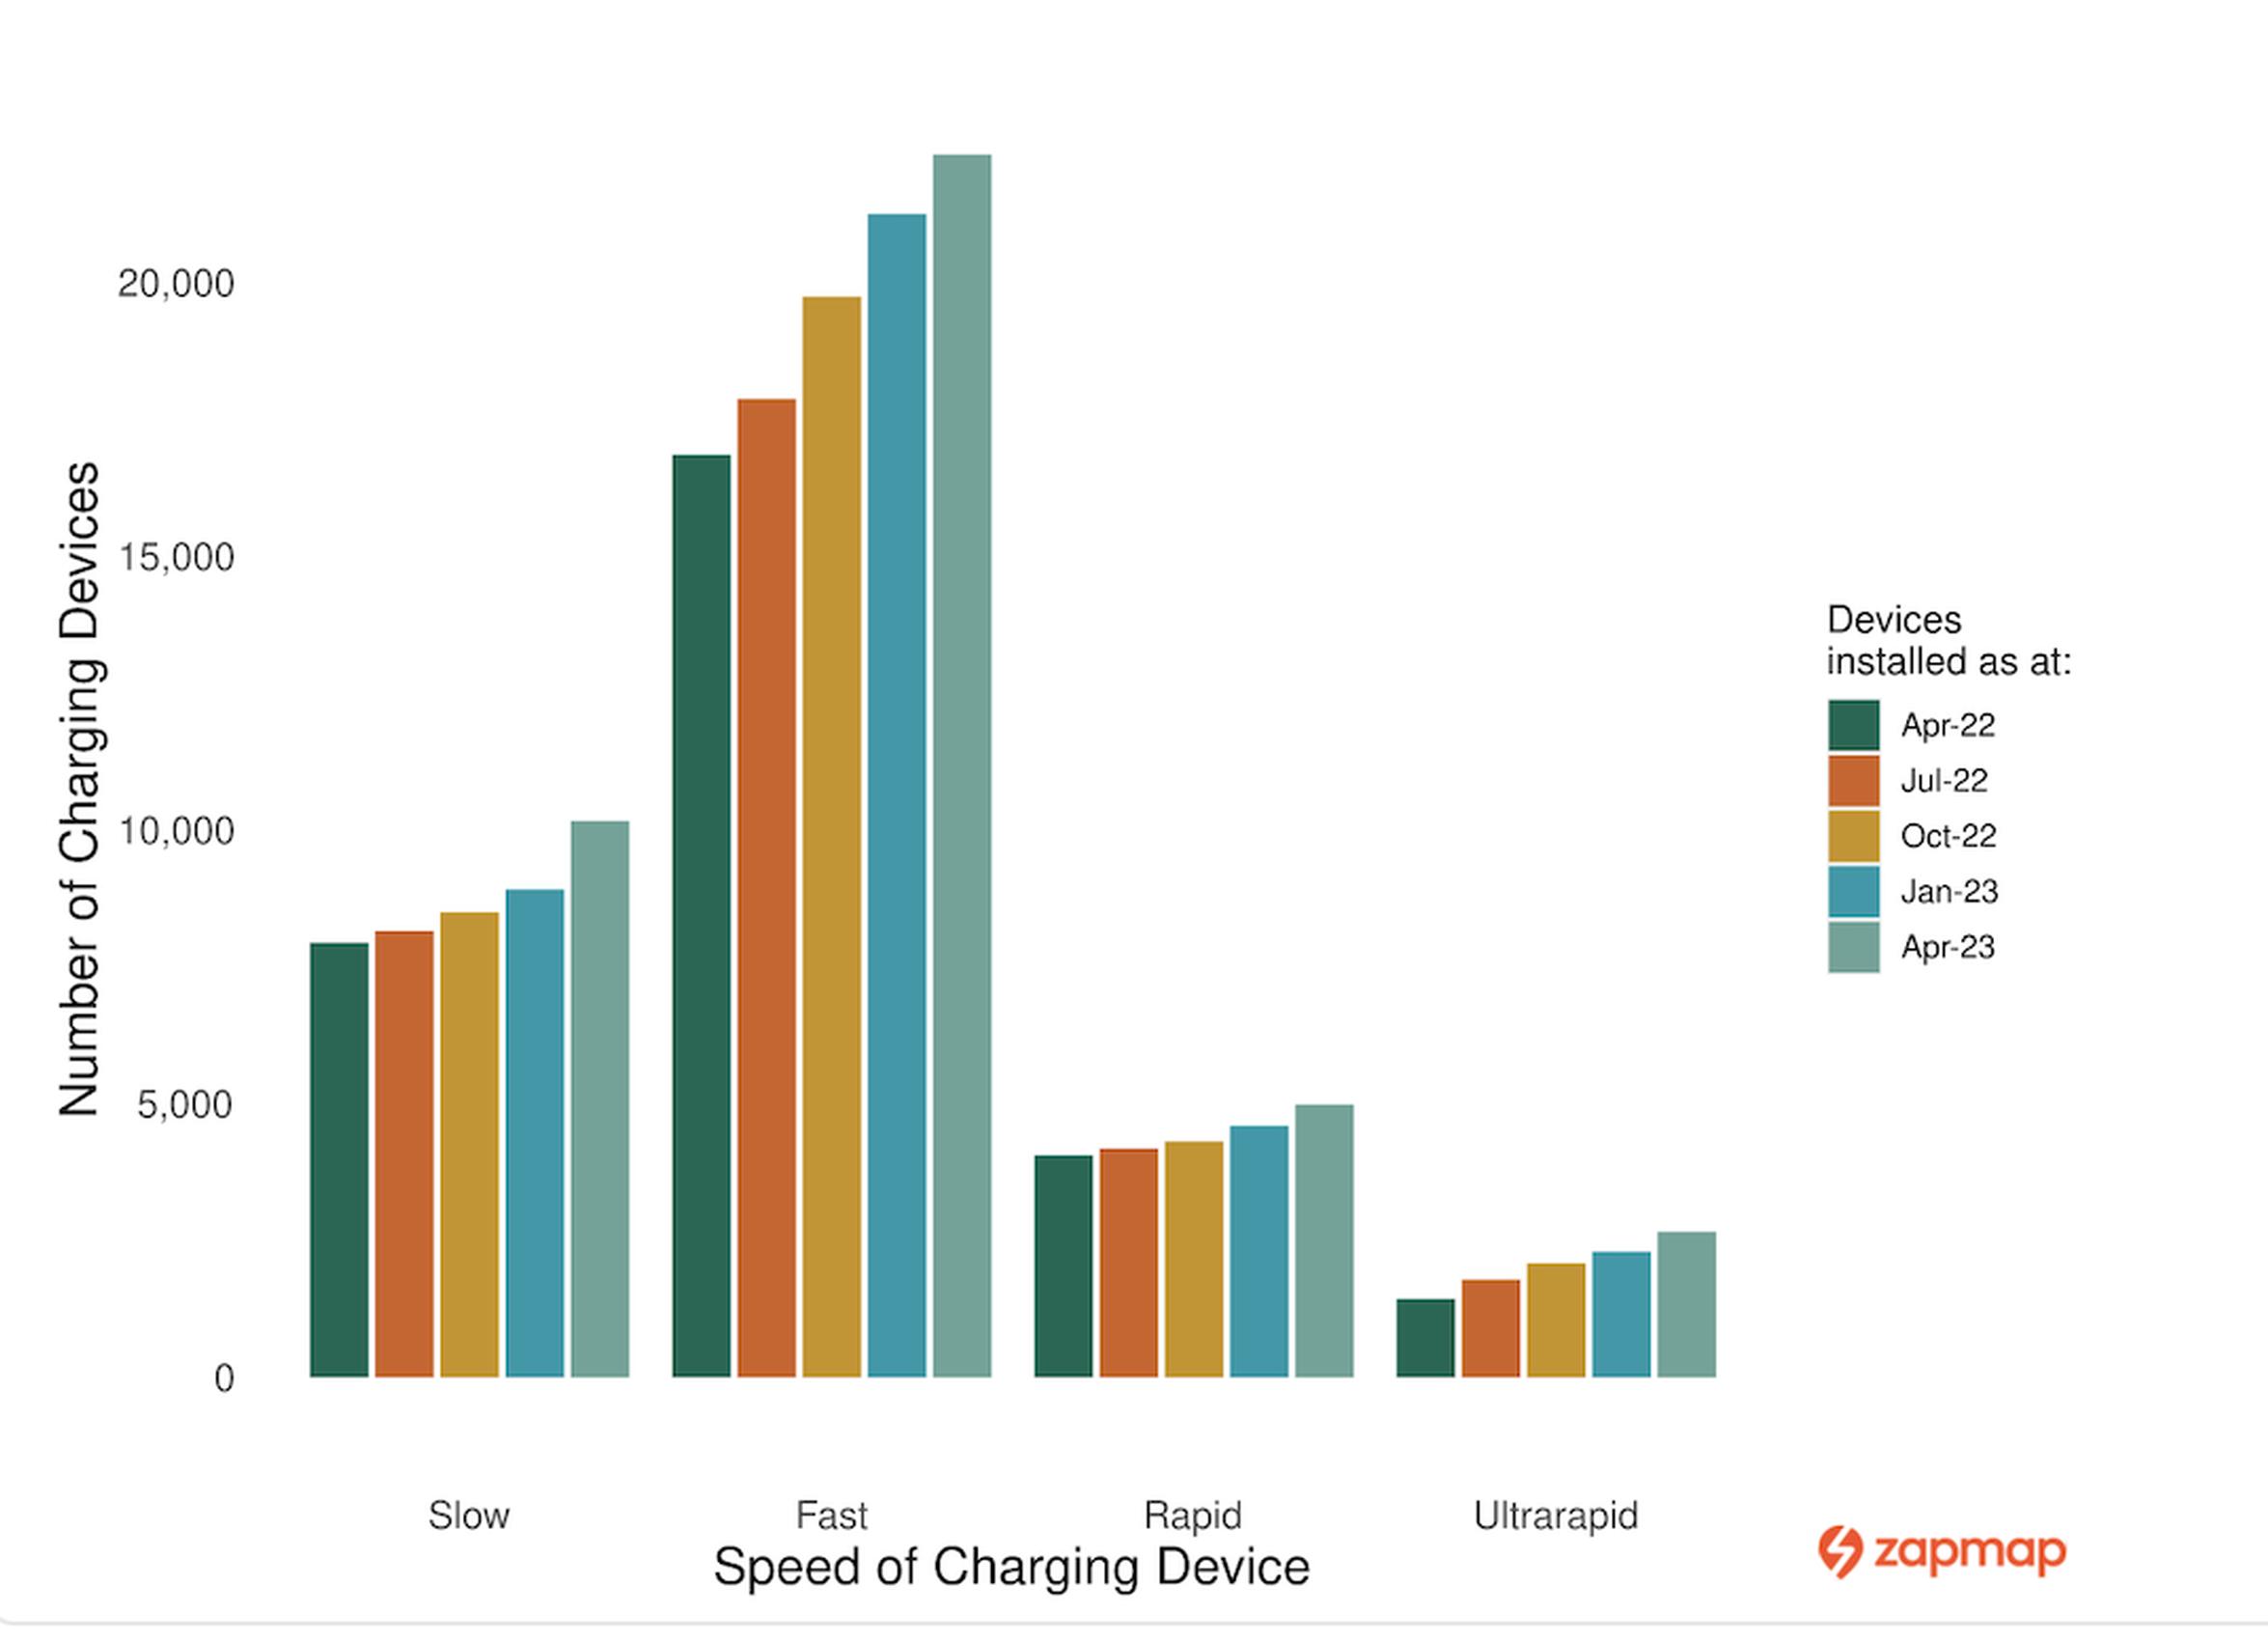 Public devices by charging speed - April 2023